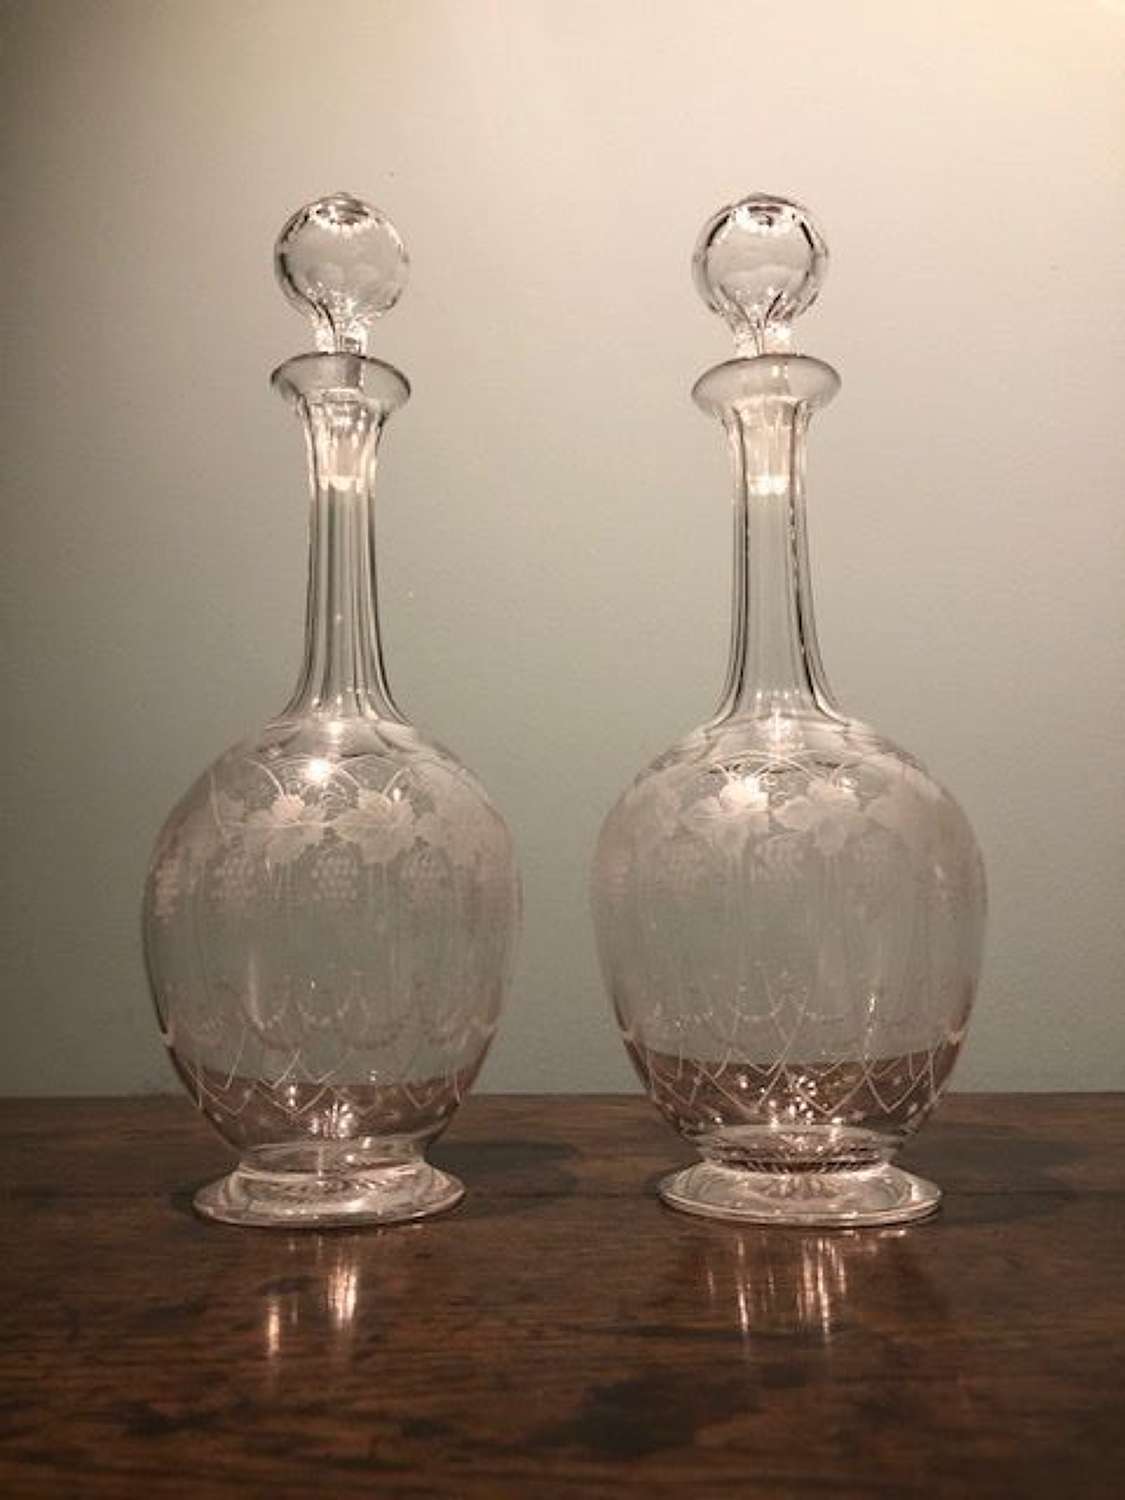 A PRETTY PAIR OF 19TH C. ENGRAVED DECANTERS